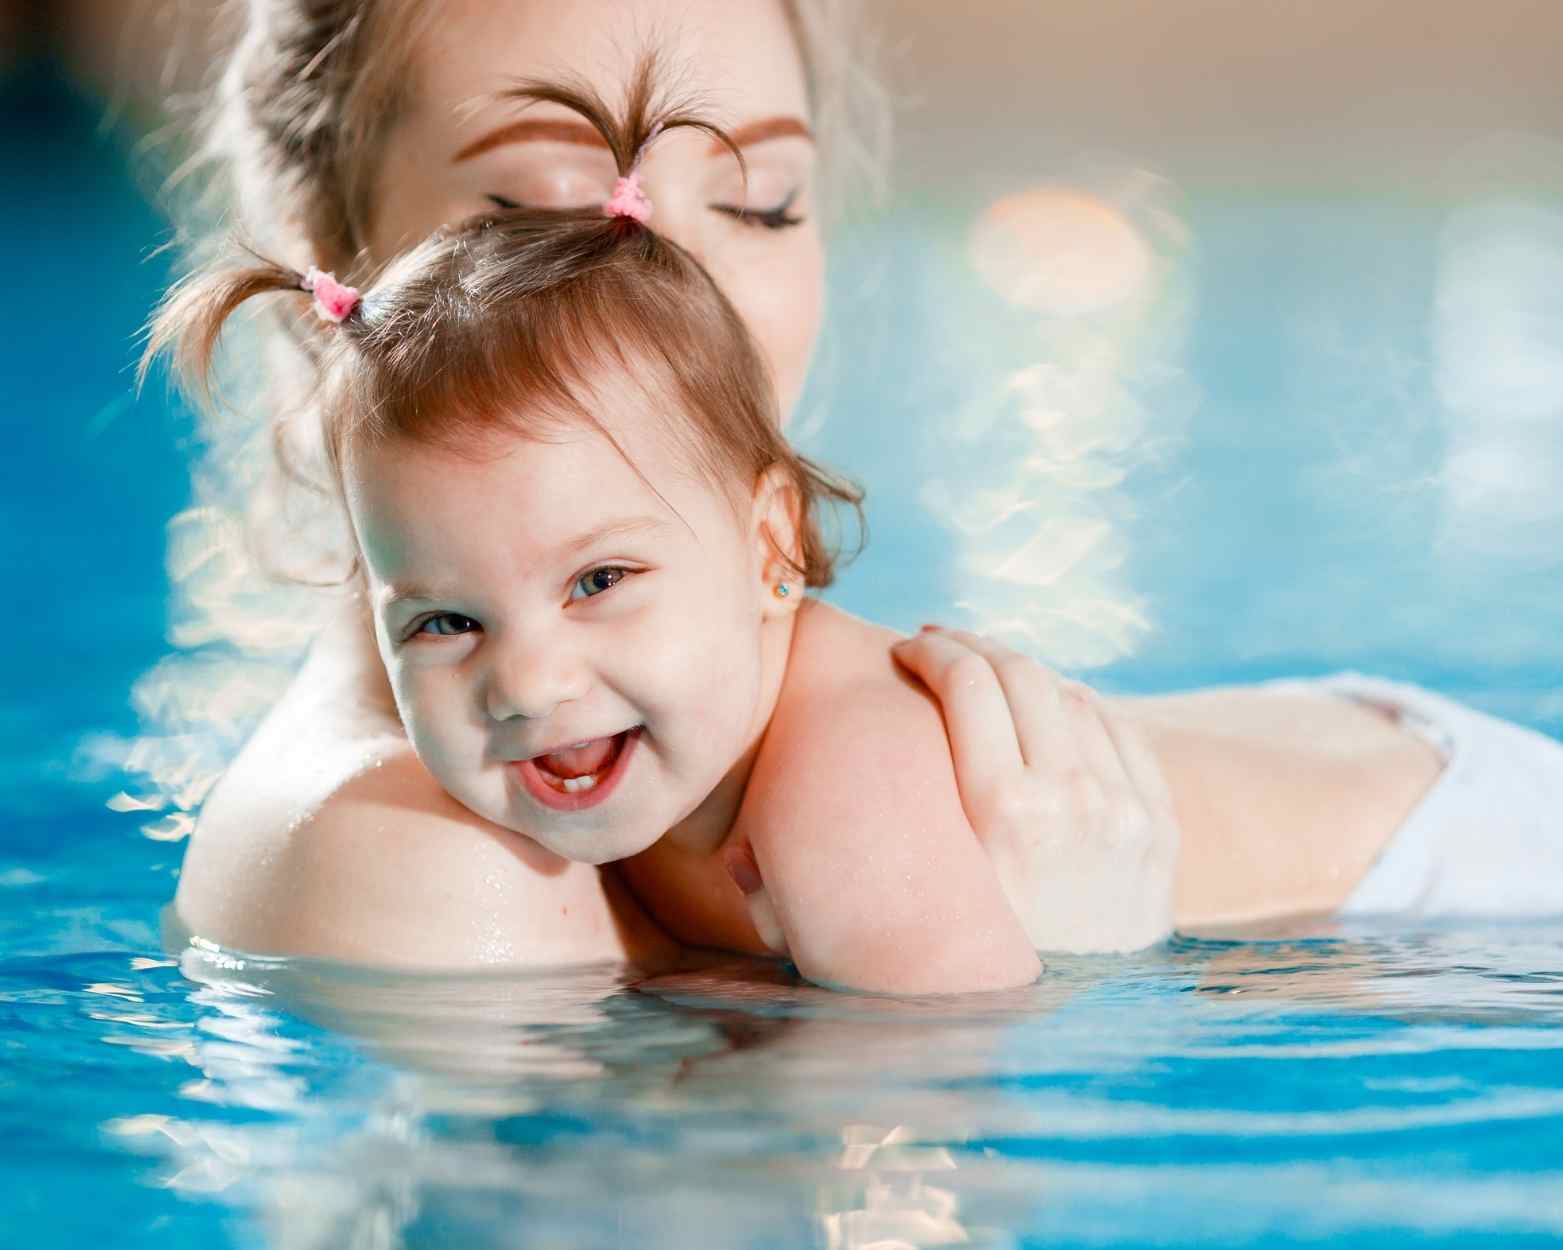 A baby girl doing swimming lessons with her mom.